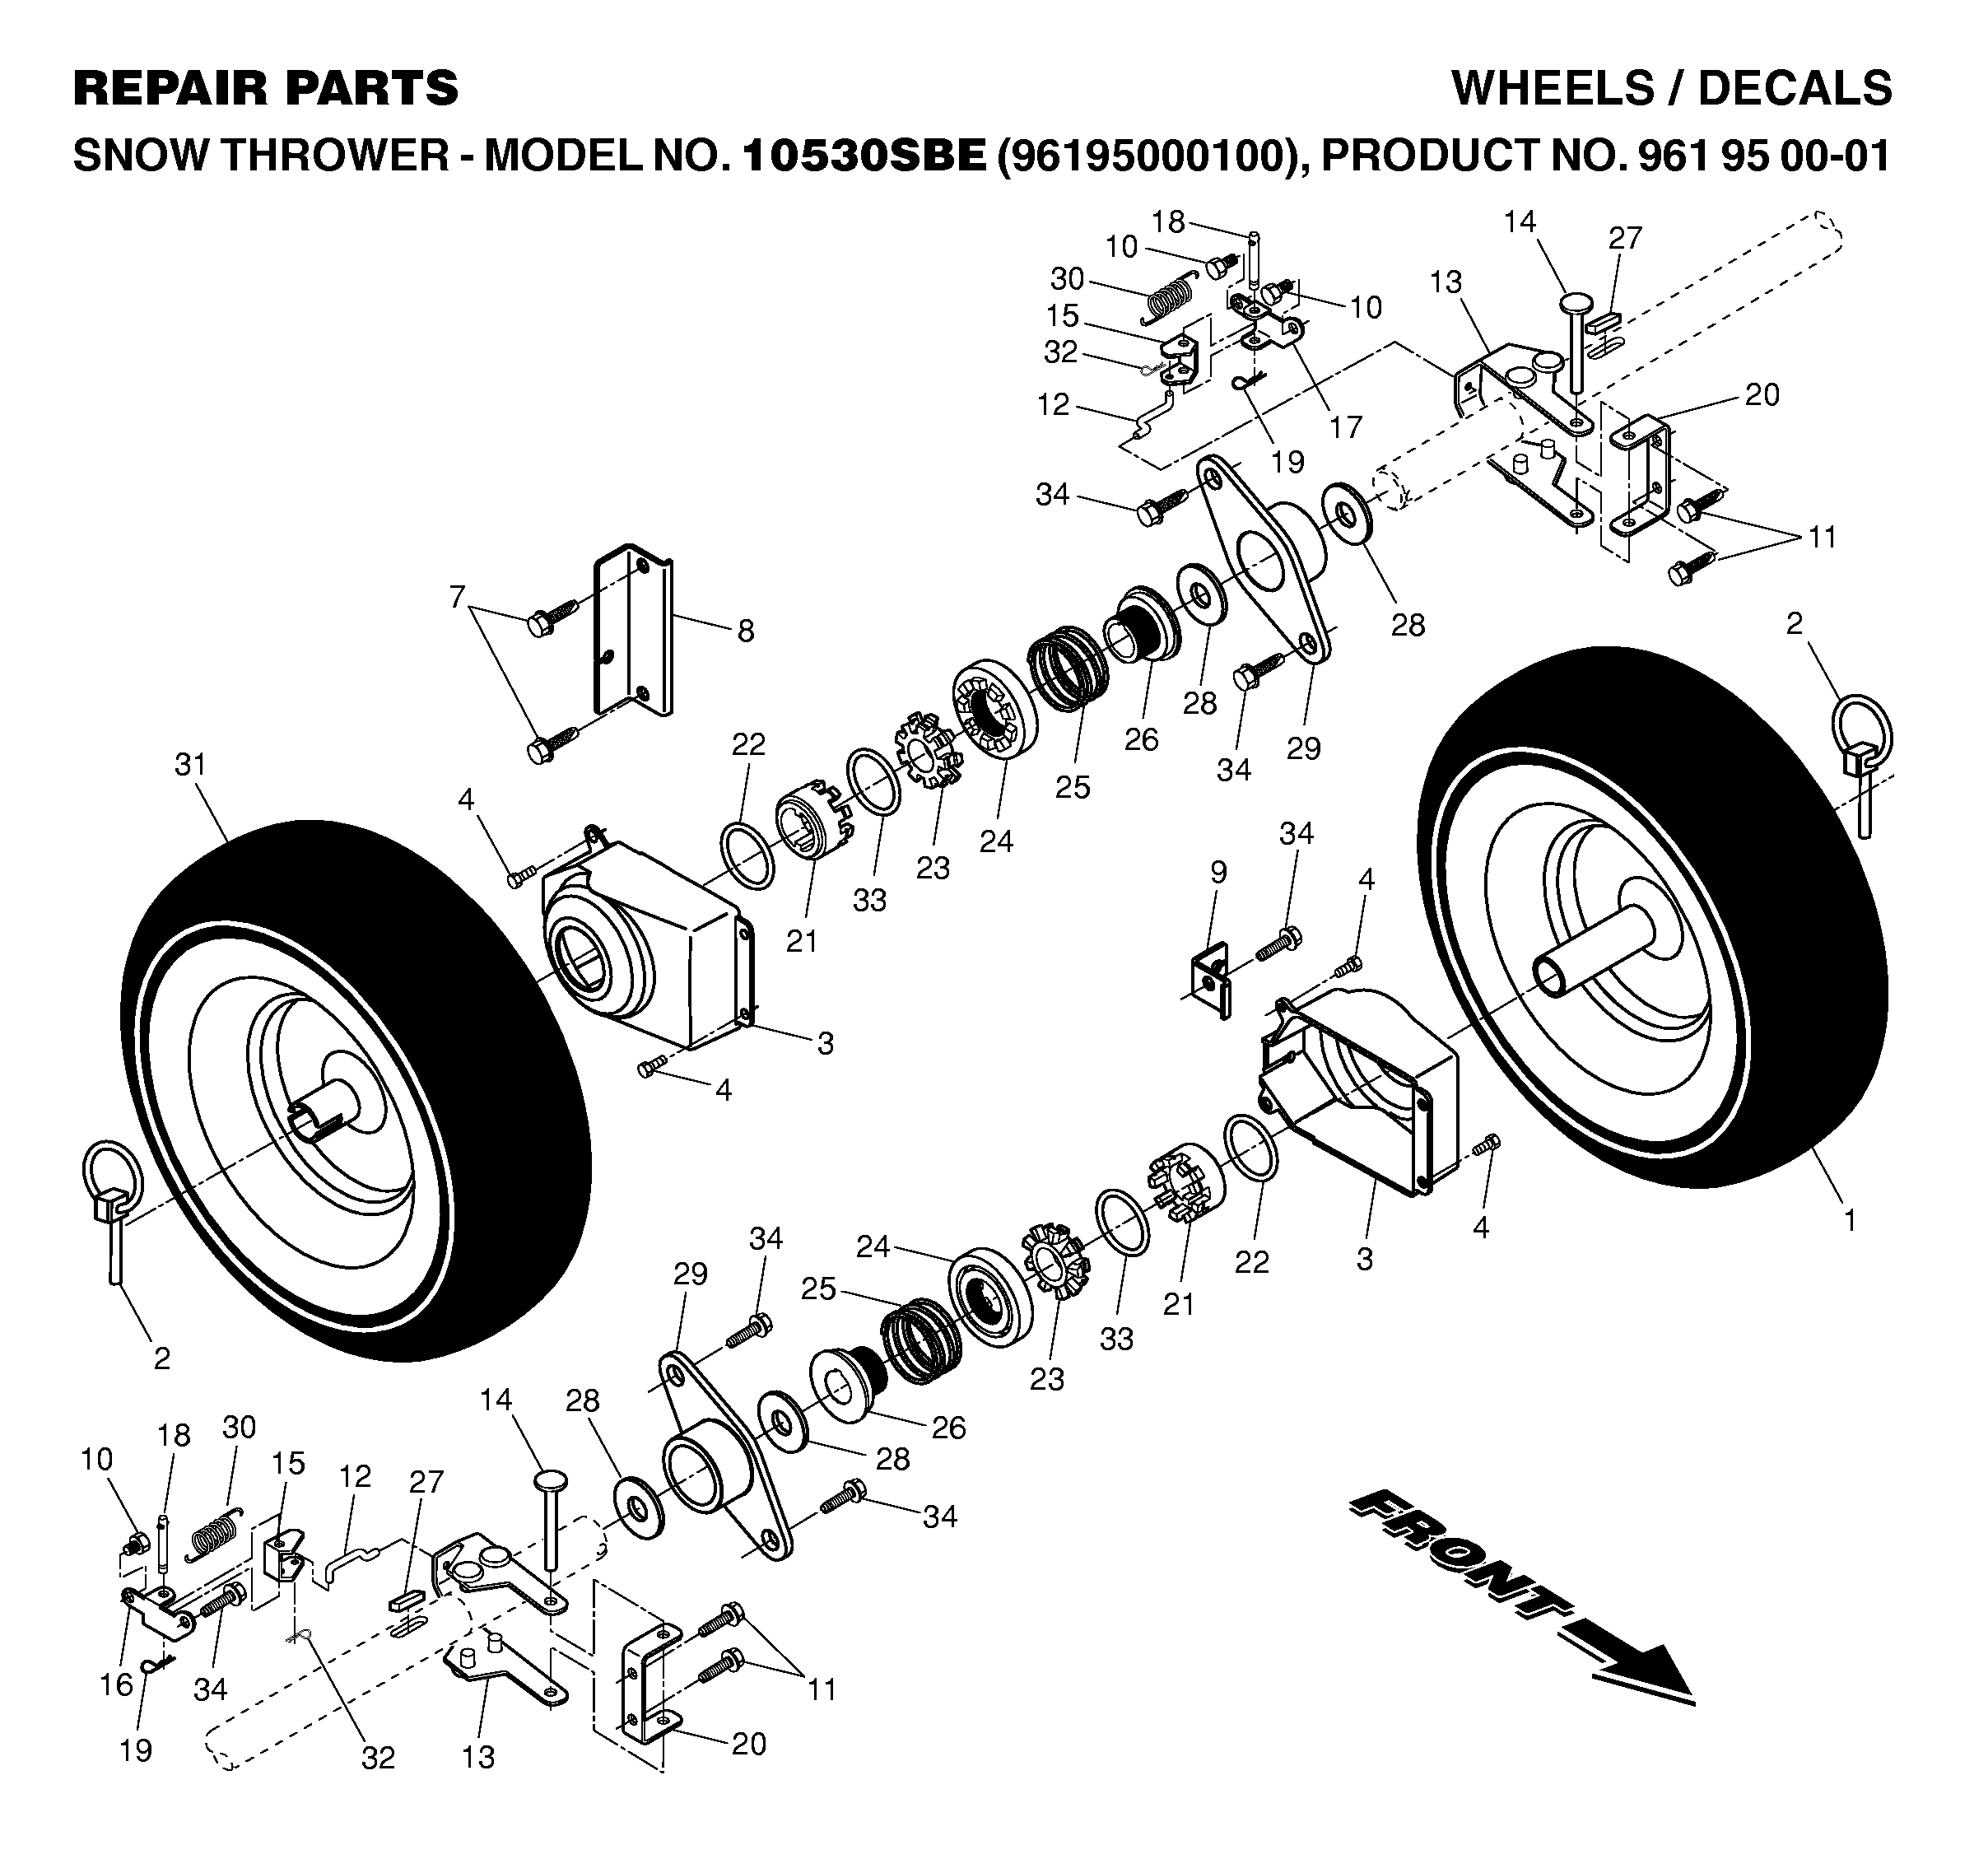 Wheels and tires 532199501, 532155443, 532192109, 594975601, 871210616, 532185603, 532187858, 817600406, 596030701, 532195749, 532199519, 532182015, 532199518, 532199512, 532199511, 532181847, 532085179, 532184197, 532192126, 532182466, 532187622, 532194941, 532179139, 532194940, 532189282, 532007396, 532179830, 532193885, 532199502, 532700279, 812000045, 532146315